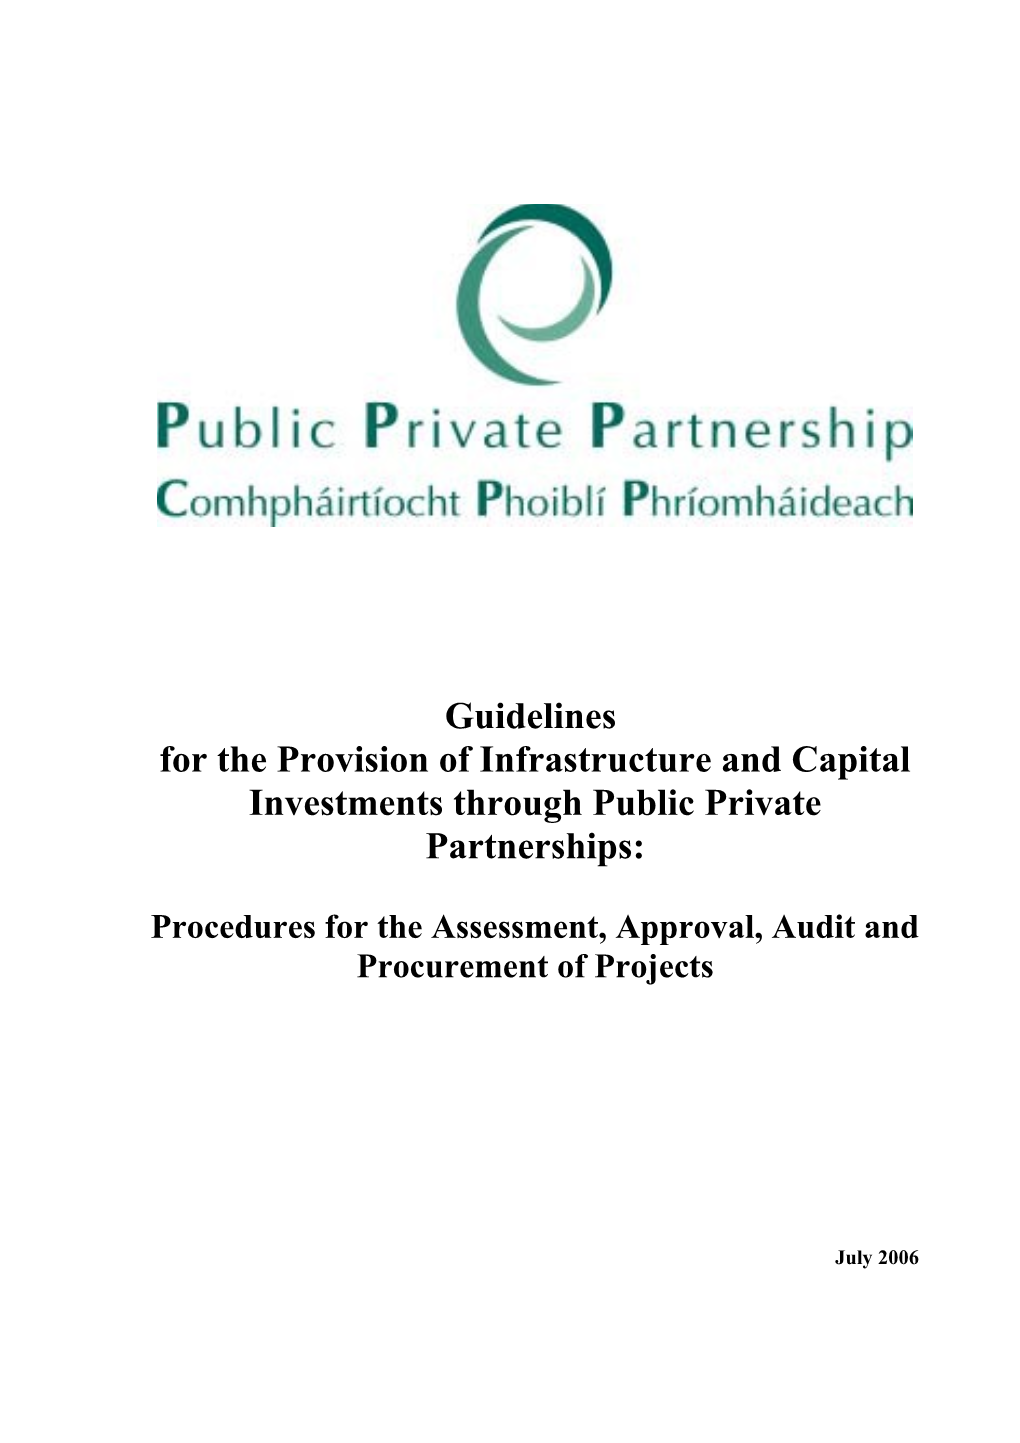 For the Provision of Infrastructure and Capital Investments Through Public Private